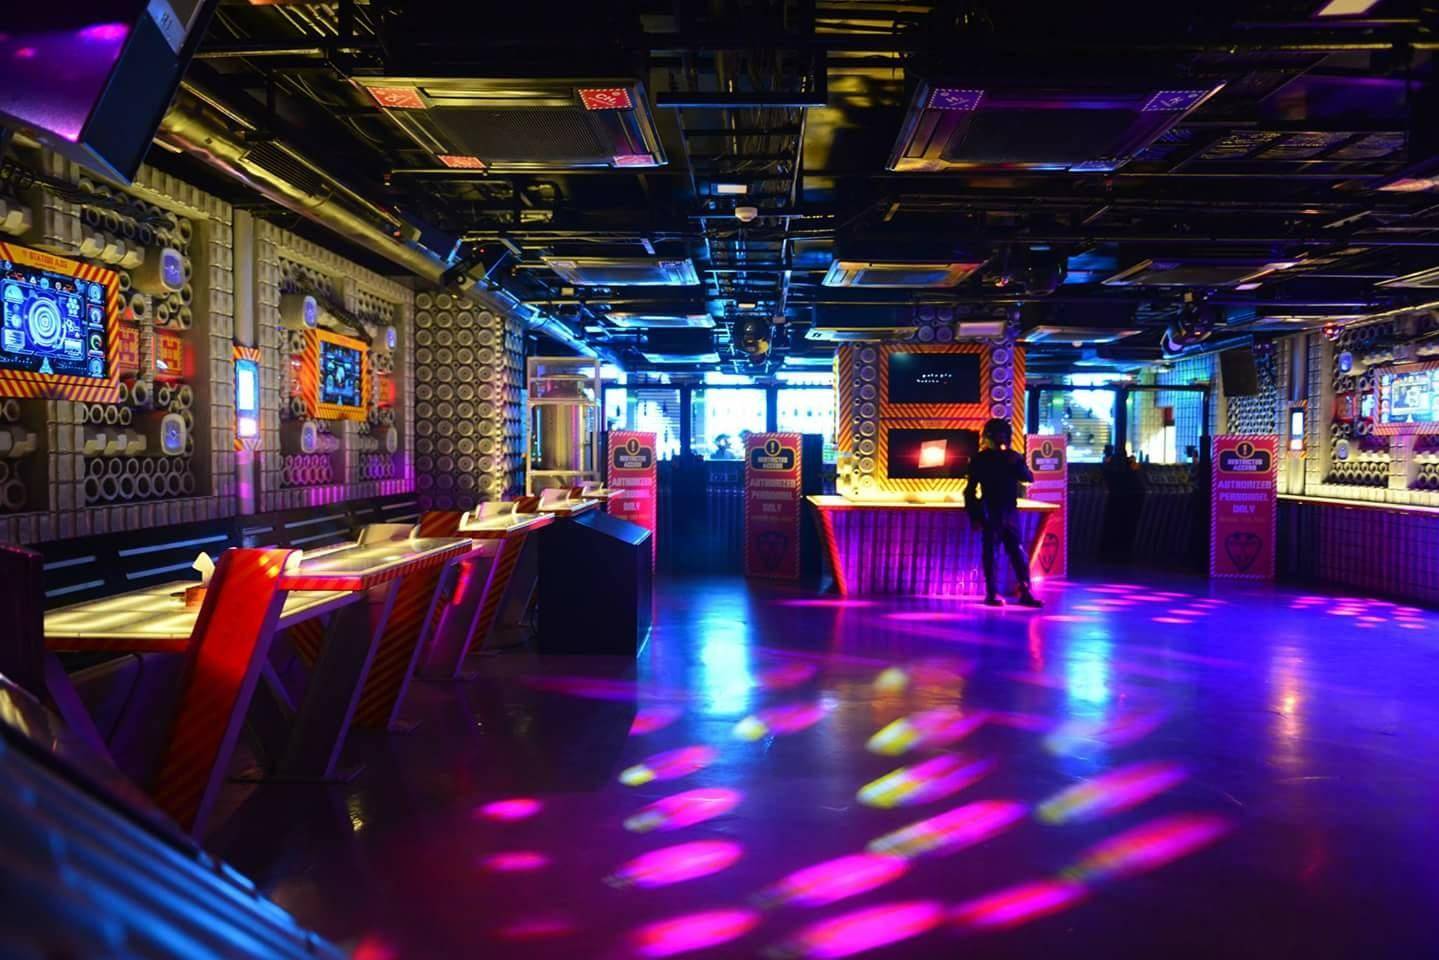 15 Best Night Clubs In Bangalore | Eventsflare Blog